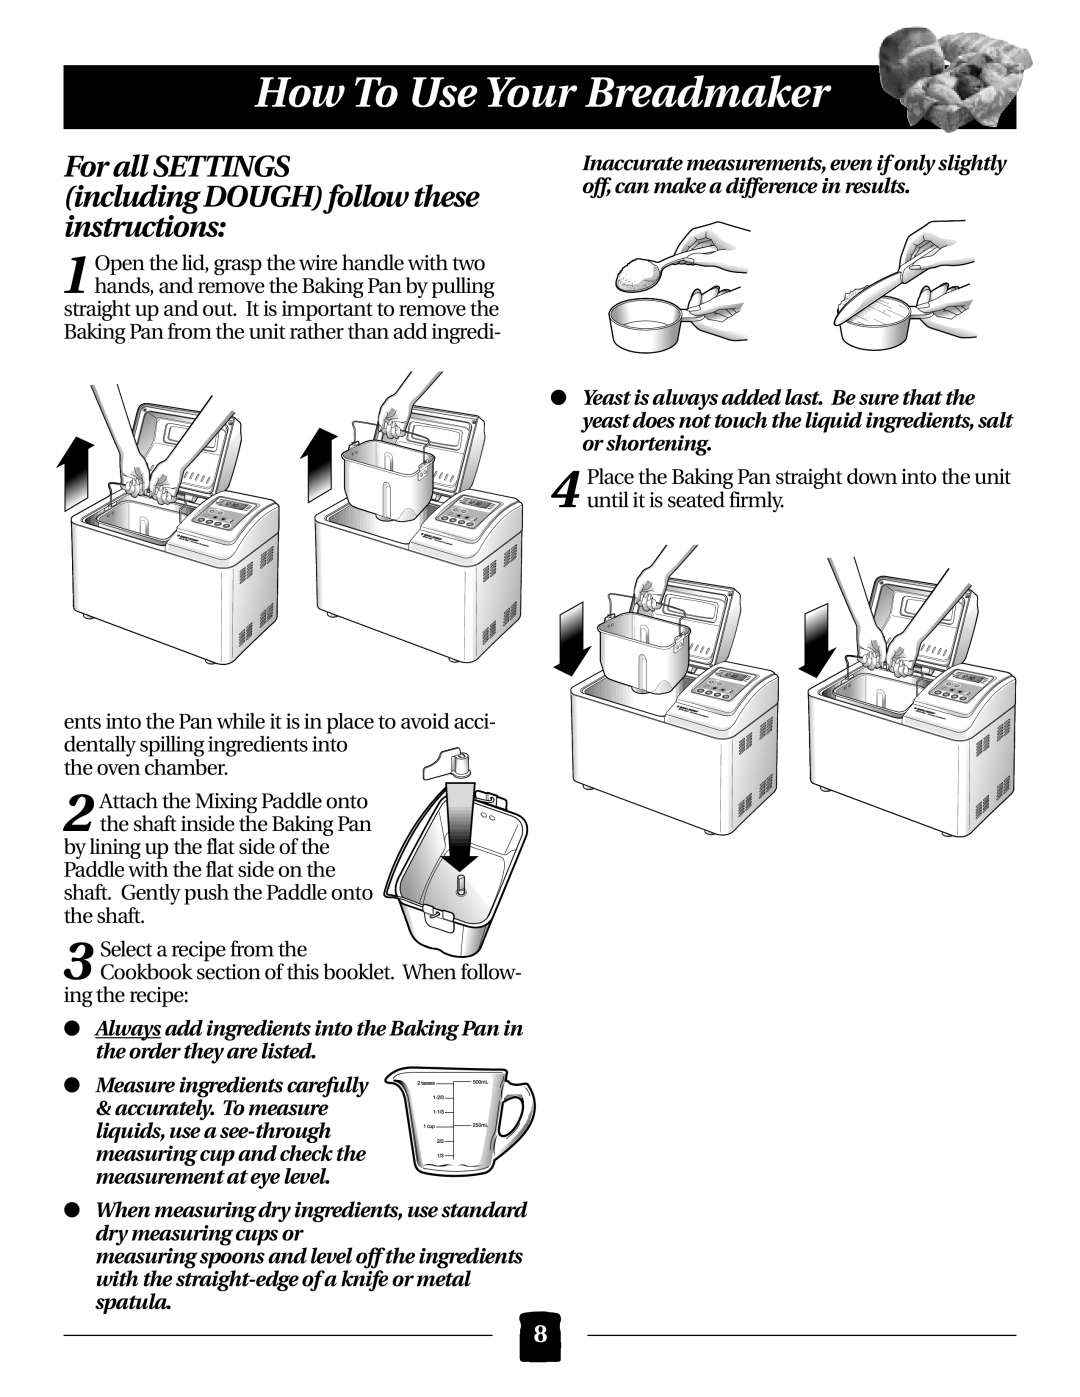 Black & Decker B2000 For all SETTINGS, including DOUGH follow these instructions, How To Use Your Breadmaker 